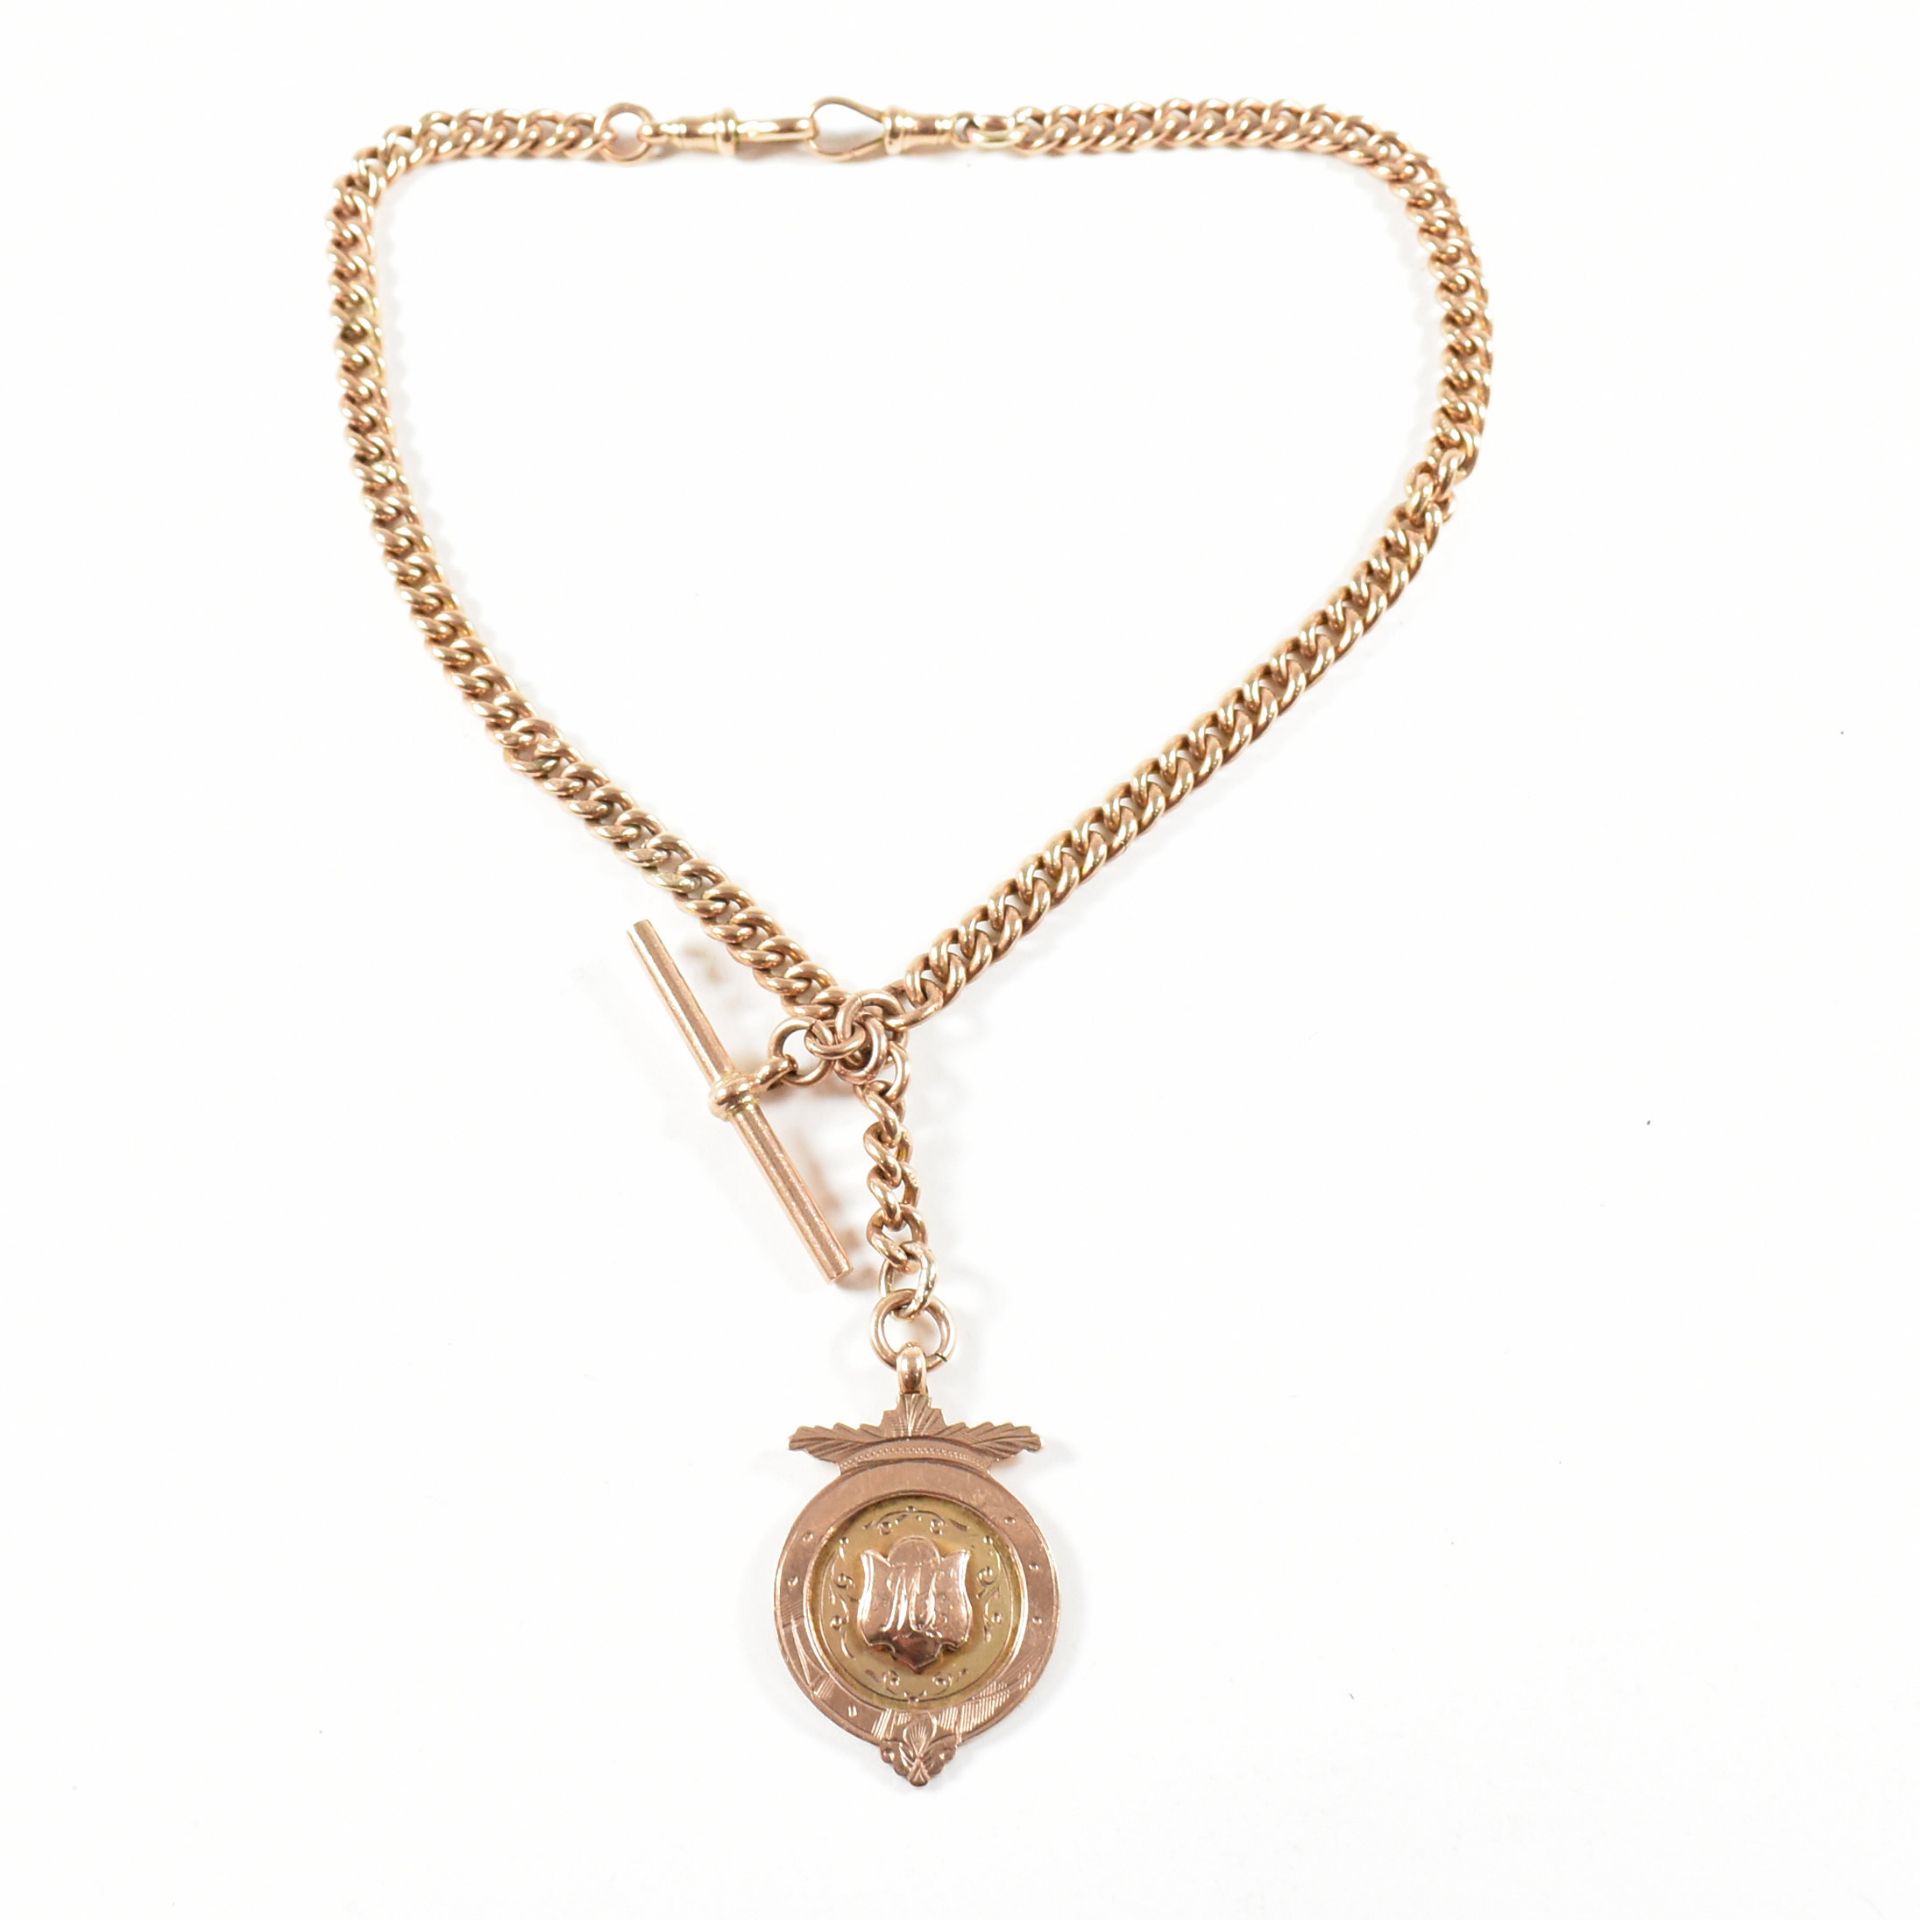 9CT GOLD ALBERT CHAIN WITH T-BAR & MEDAL - Image 2 of 6